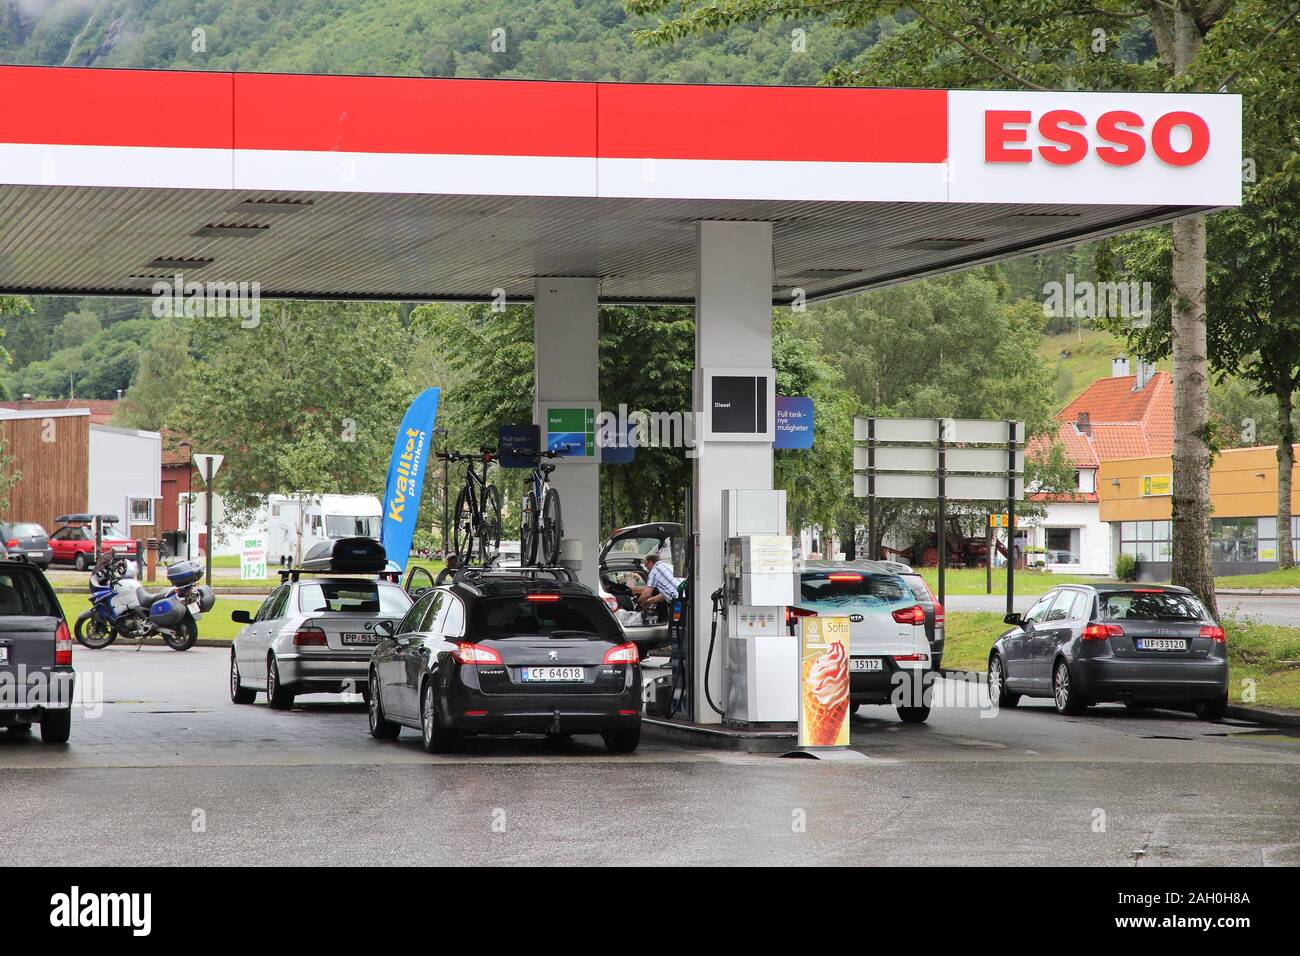 STRYN, NORWAY - JULY 19, 2015: Esso gas station in Stryn, Norway. Esso brand is a part of ExxonMobil oil industry group. Stock Photo